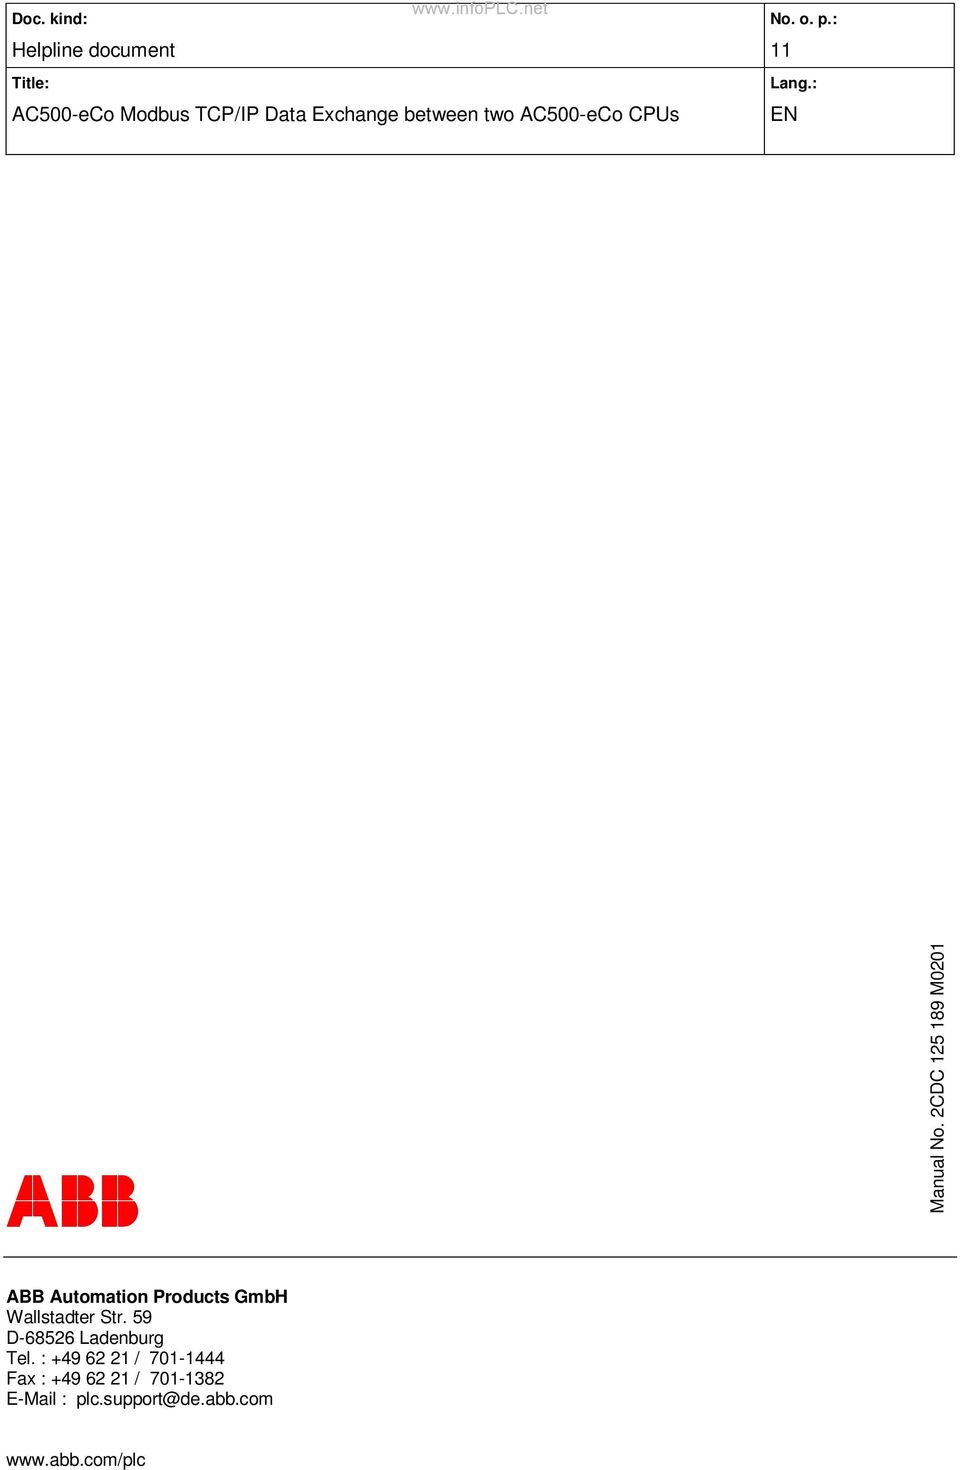 2CDC 125 189 M0201 ABB Automation Products GmbH Wallstadter Str.